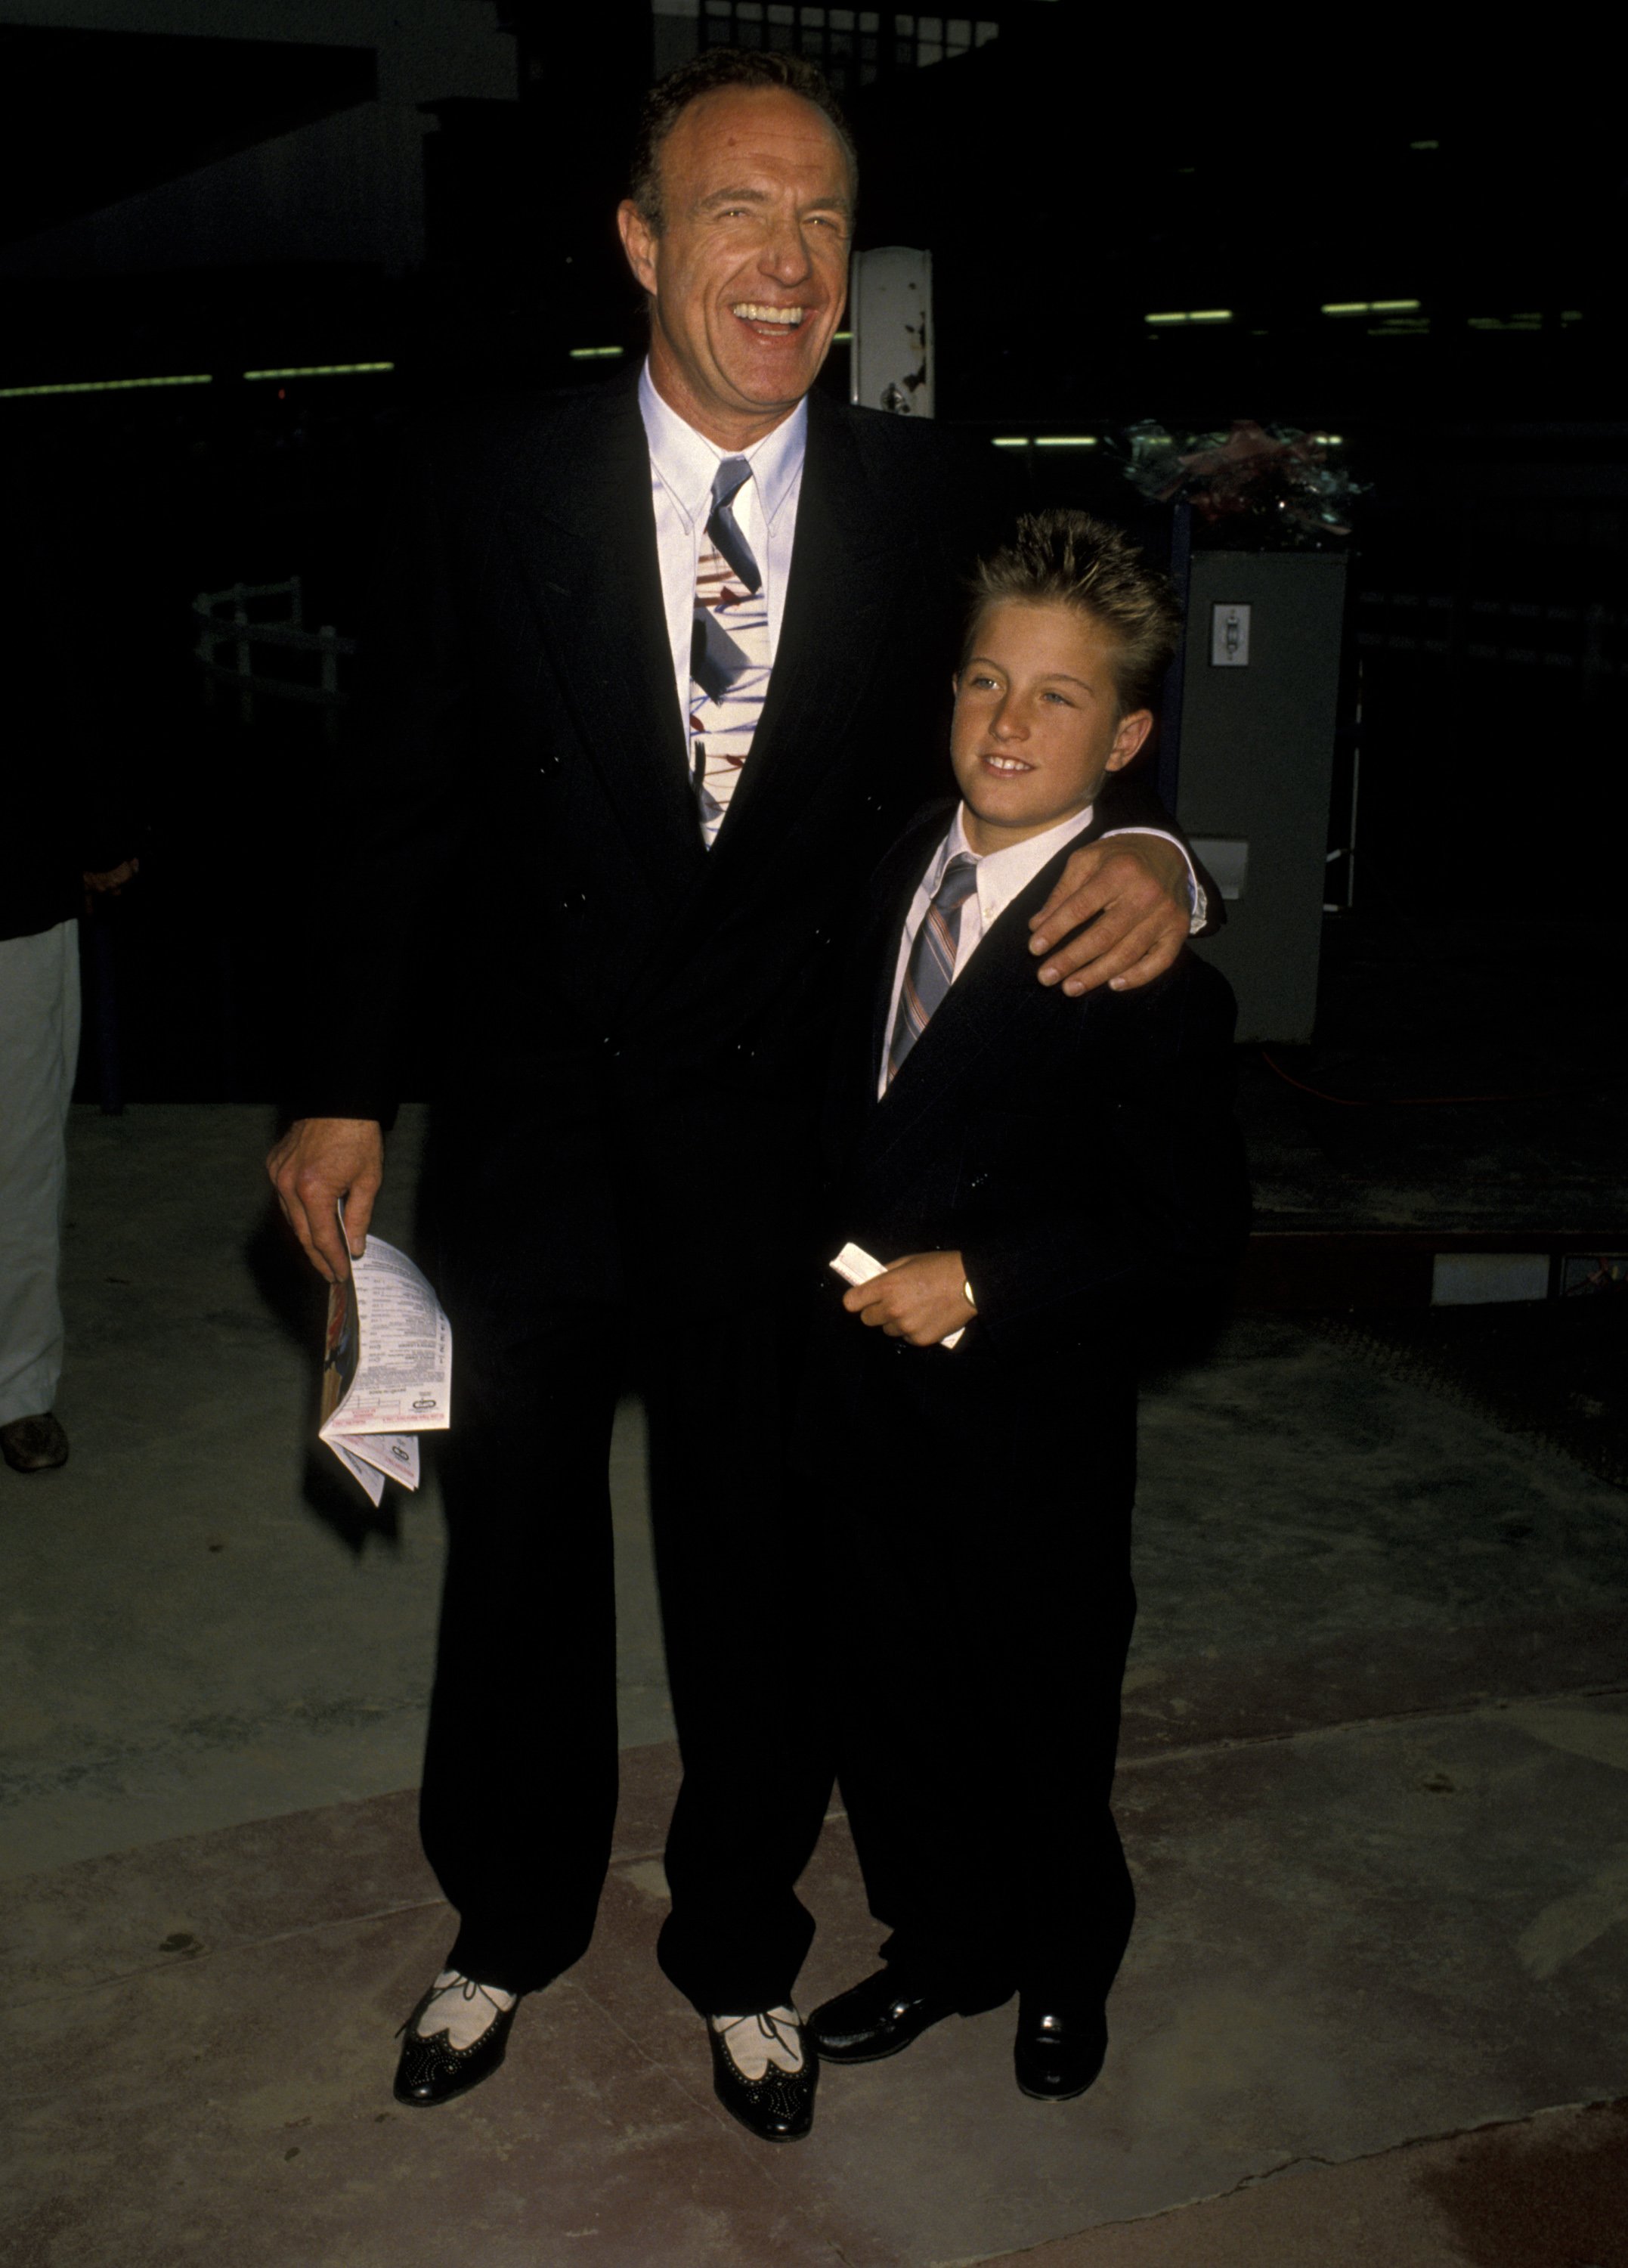 James and Son Scott Caan during "Hollywood Stars Night" 1st Thoroughbred in Hollywood, California, on June 22, 1990. | Source: Getty Images